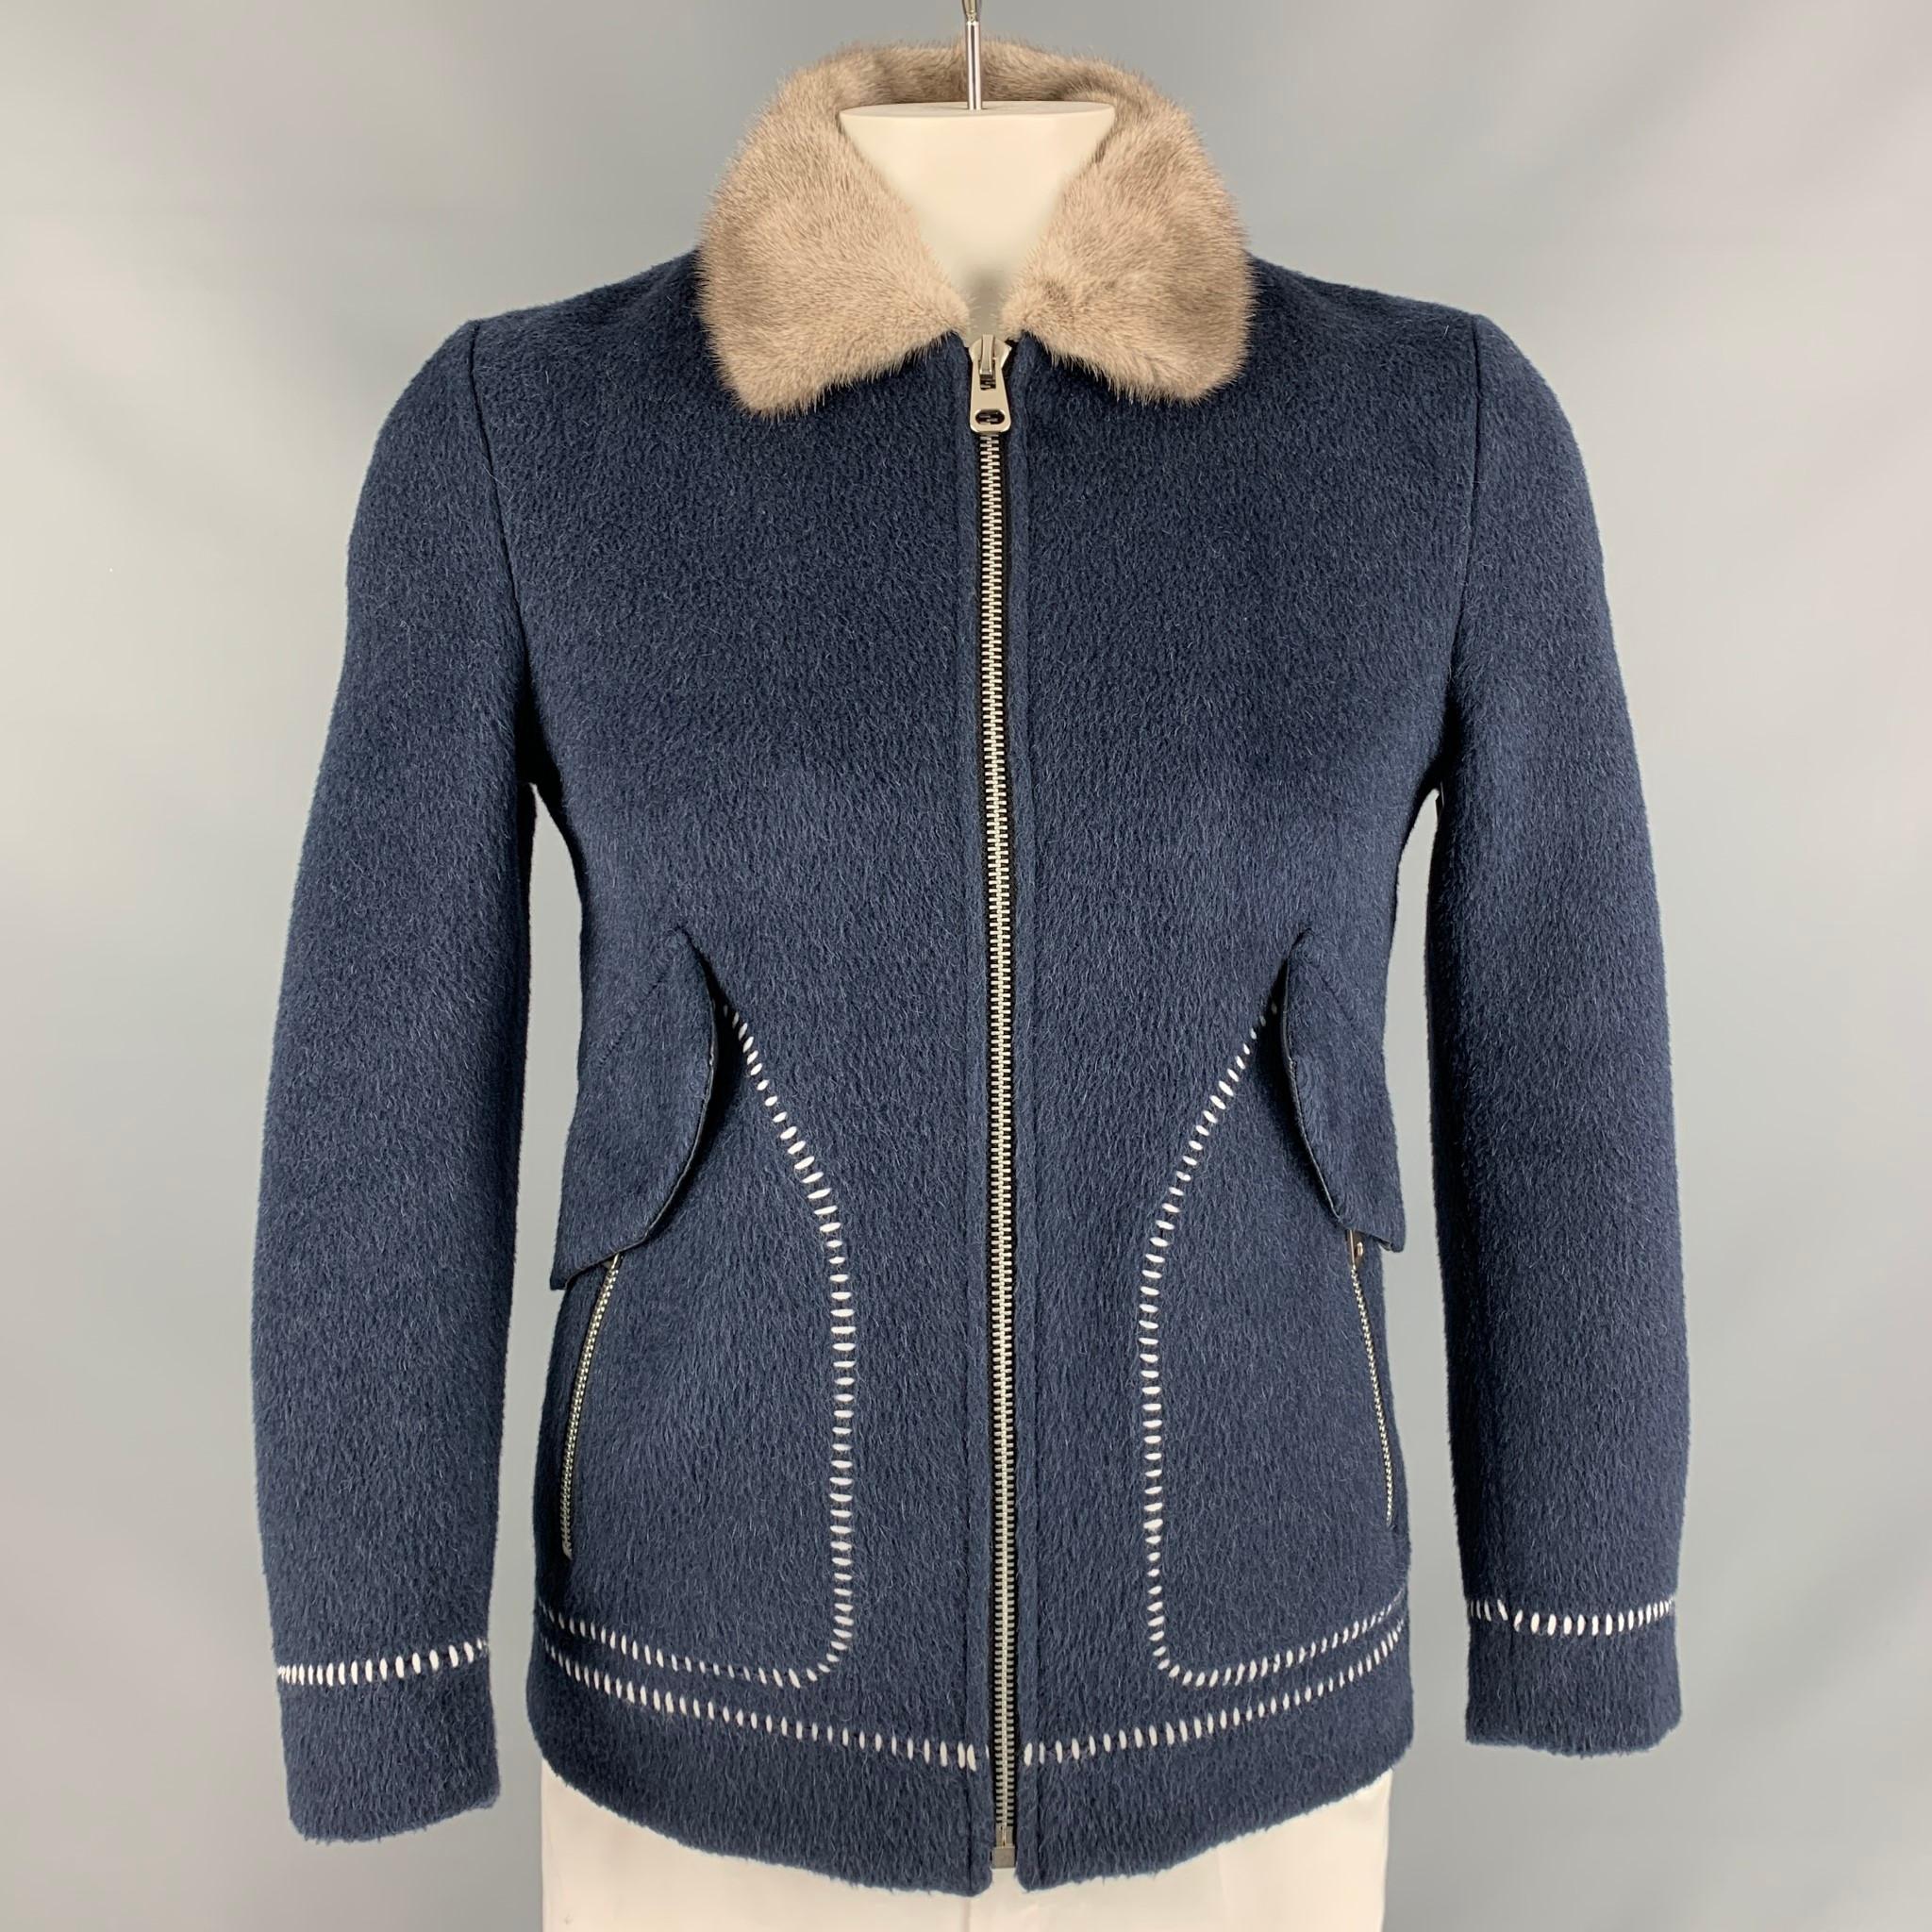 NO BRAND LISTED jacket comes in a navy textured fabric featuring a grey fur collar, two large patch pockets with flap at front and zip up closure. 

Excellent Pre-Owned Condition.
Marked: 3XL

Measurements:

Shoulder: 18 in
Chest: 39 in
Sleeve: 25.5